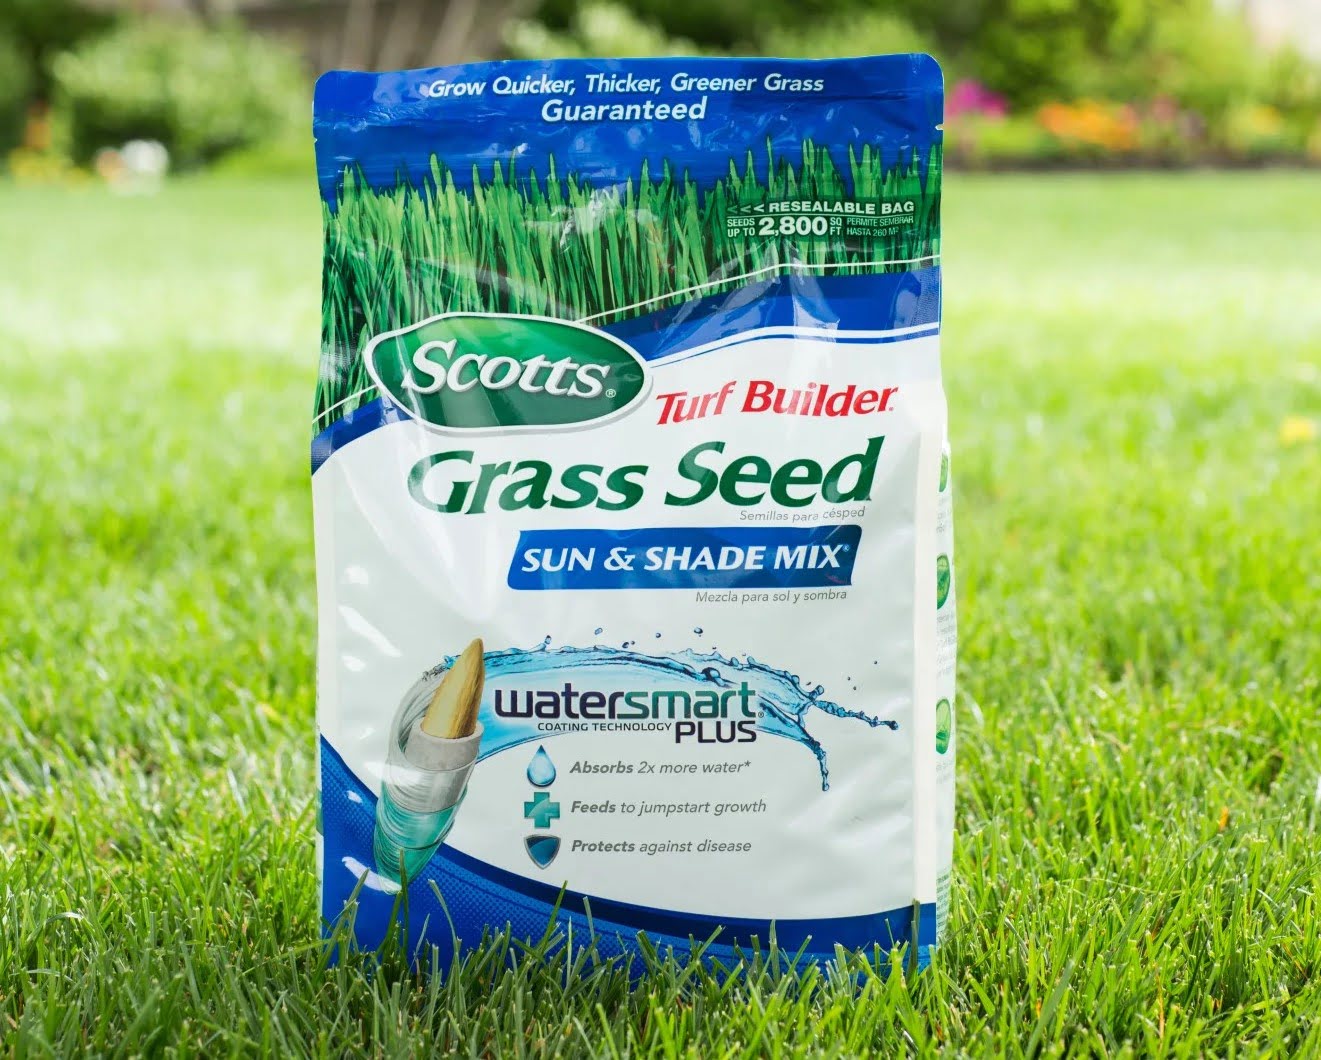 How Long Does A Bag Of Grass Seed Last